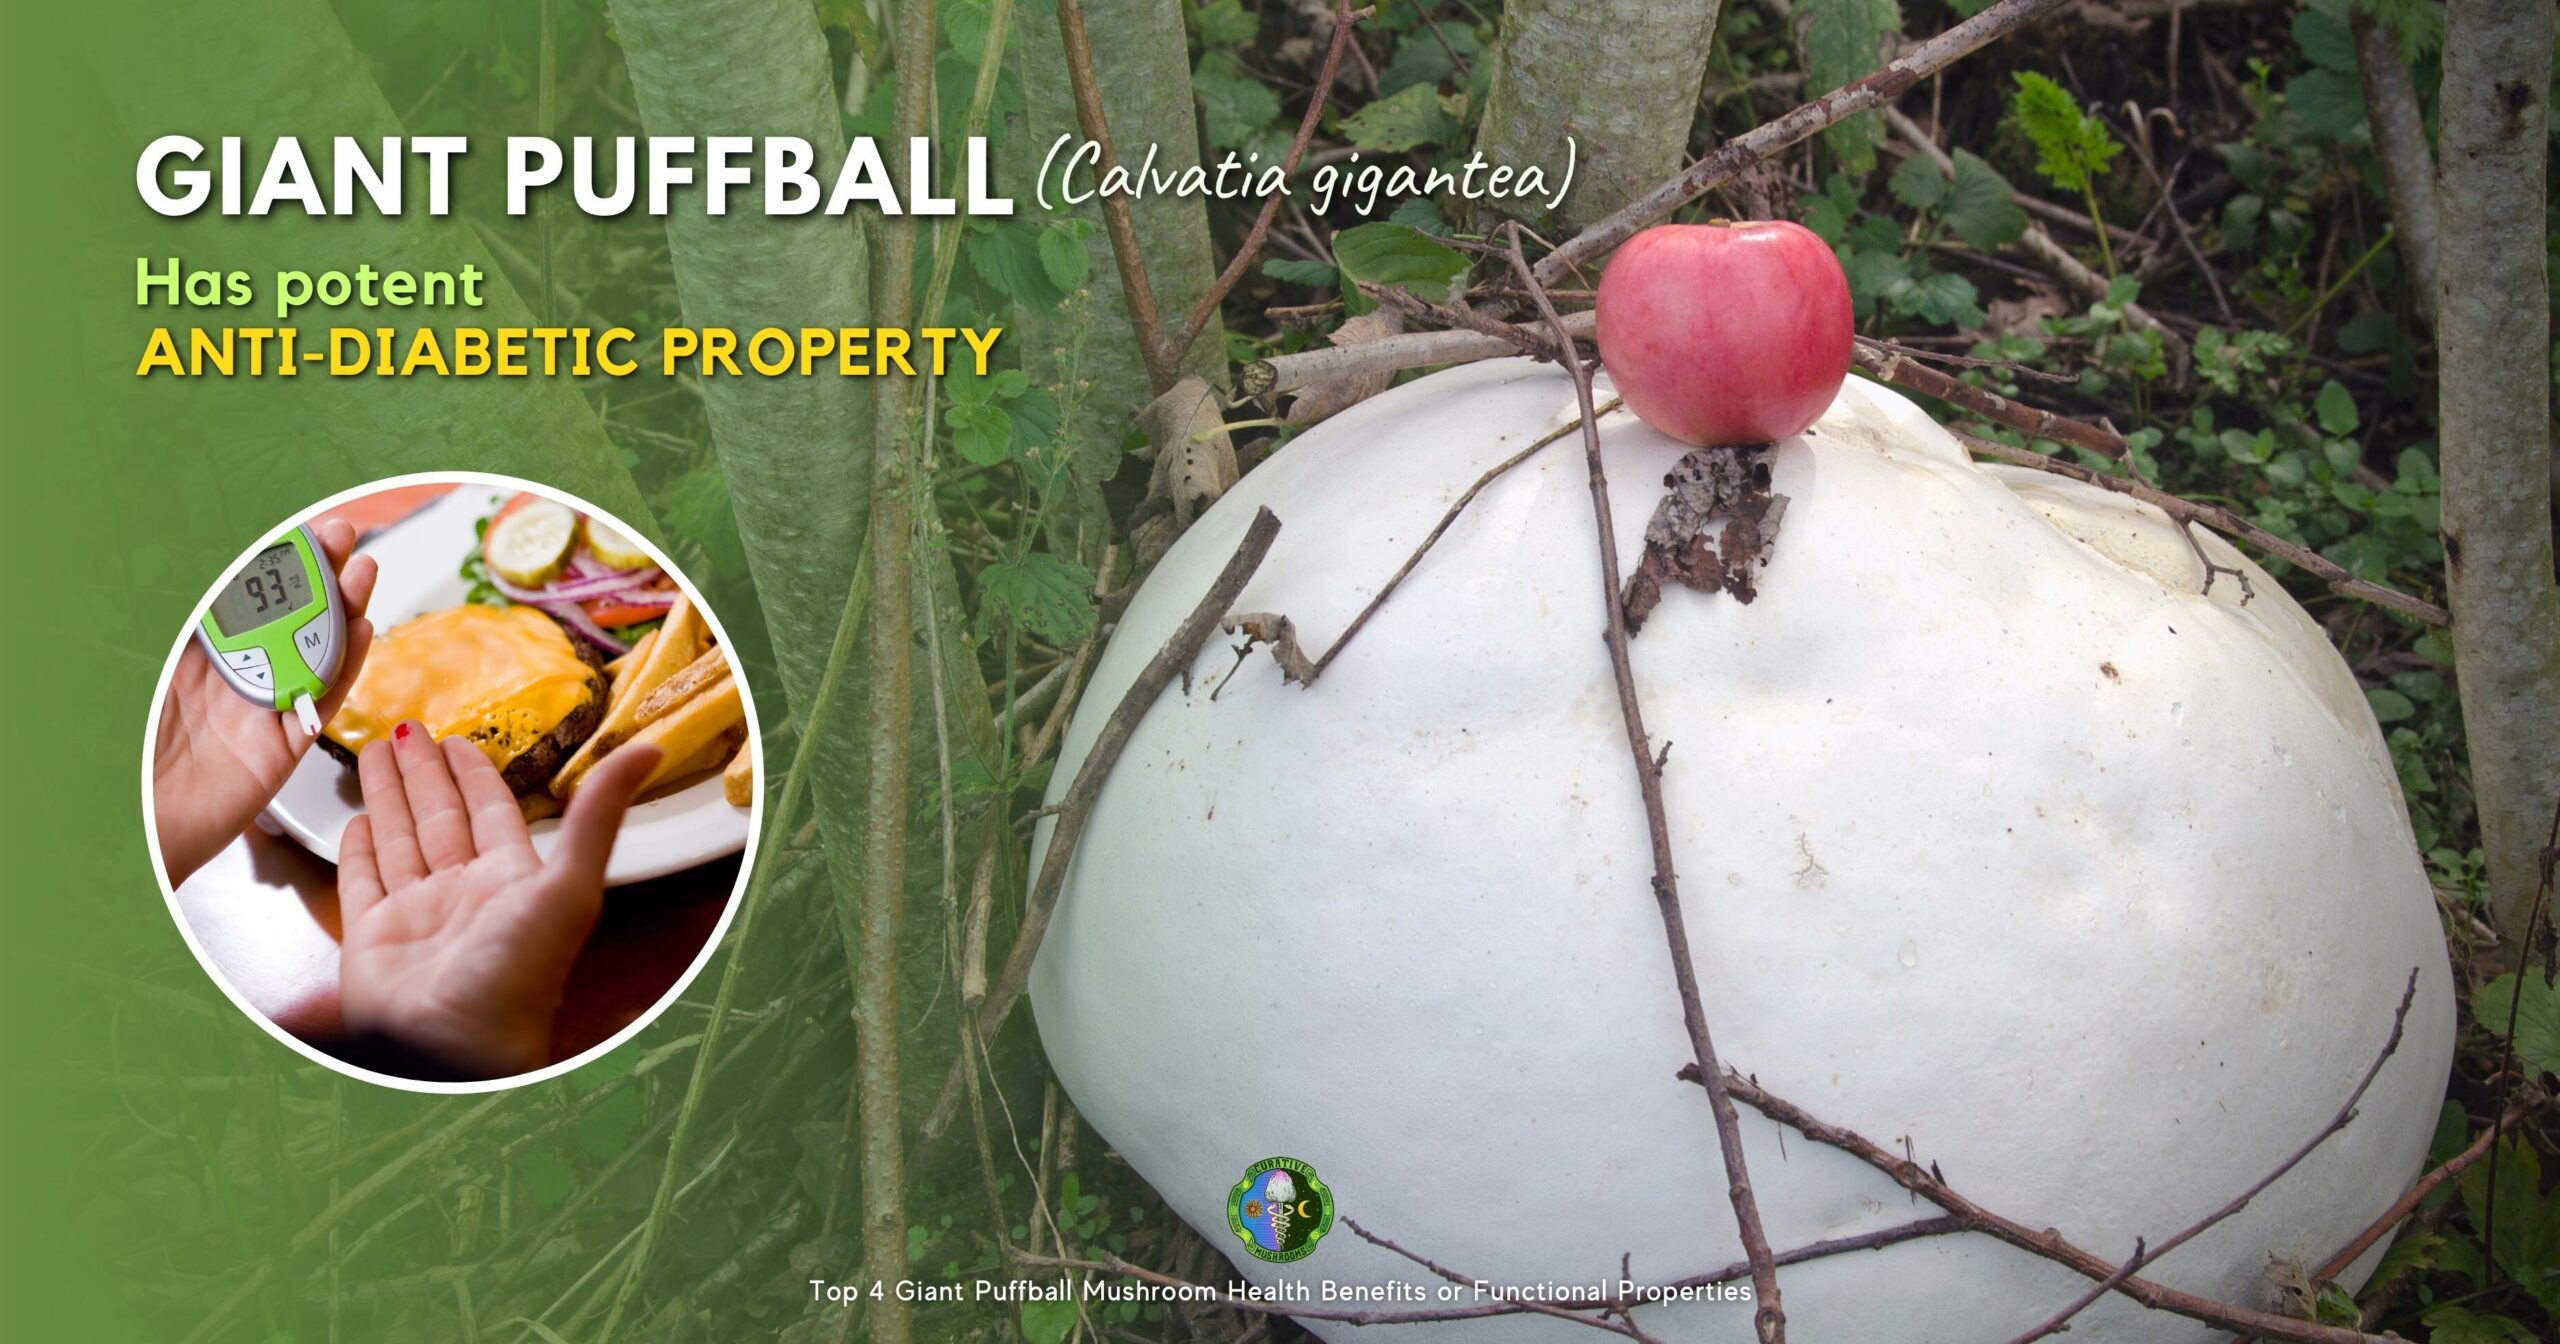 Giant Puffball has potent anti-diabetic property - reducing blood glucose levels by 29.3 percent